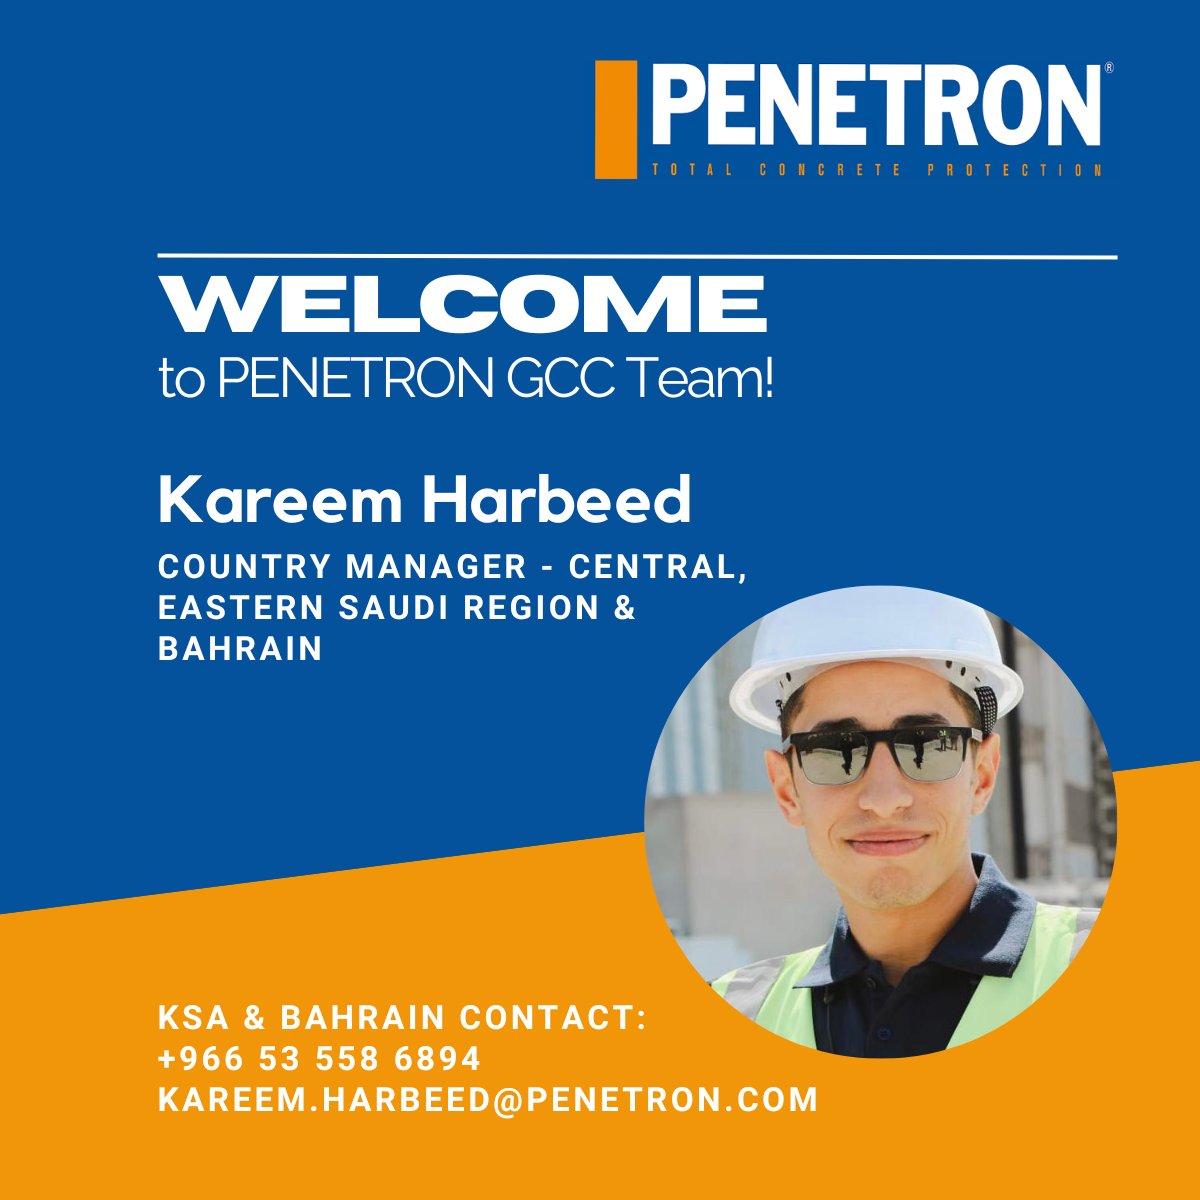 Welcome to Penetron GCC Team Kareem Harbeed! Happy to have you on board!

For KSA & Bahrain contact, please feel free to contact Mr. Kareem at +966 53 558 6894 or kareem.harbeed@penetron.com
#PenetronGCC #PenetronGlobal #PenetronStrong #waterproofingsolutions